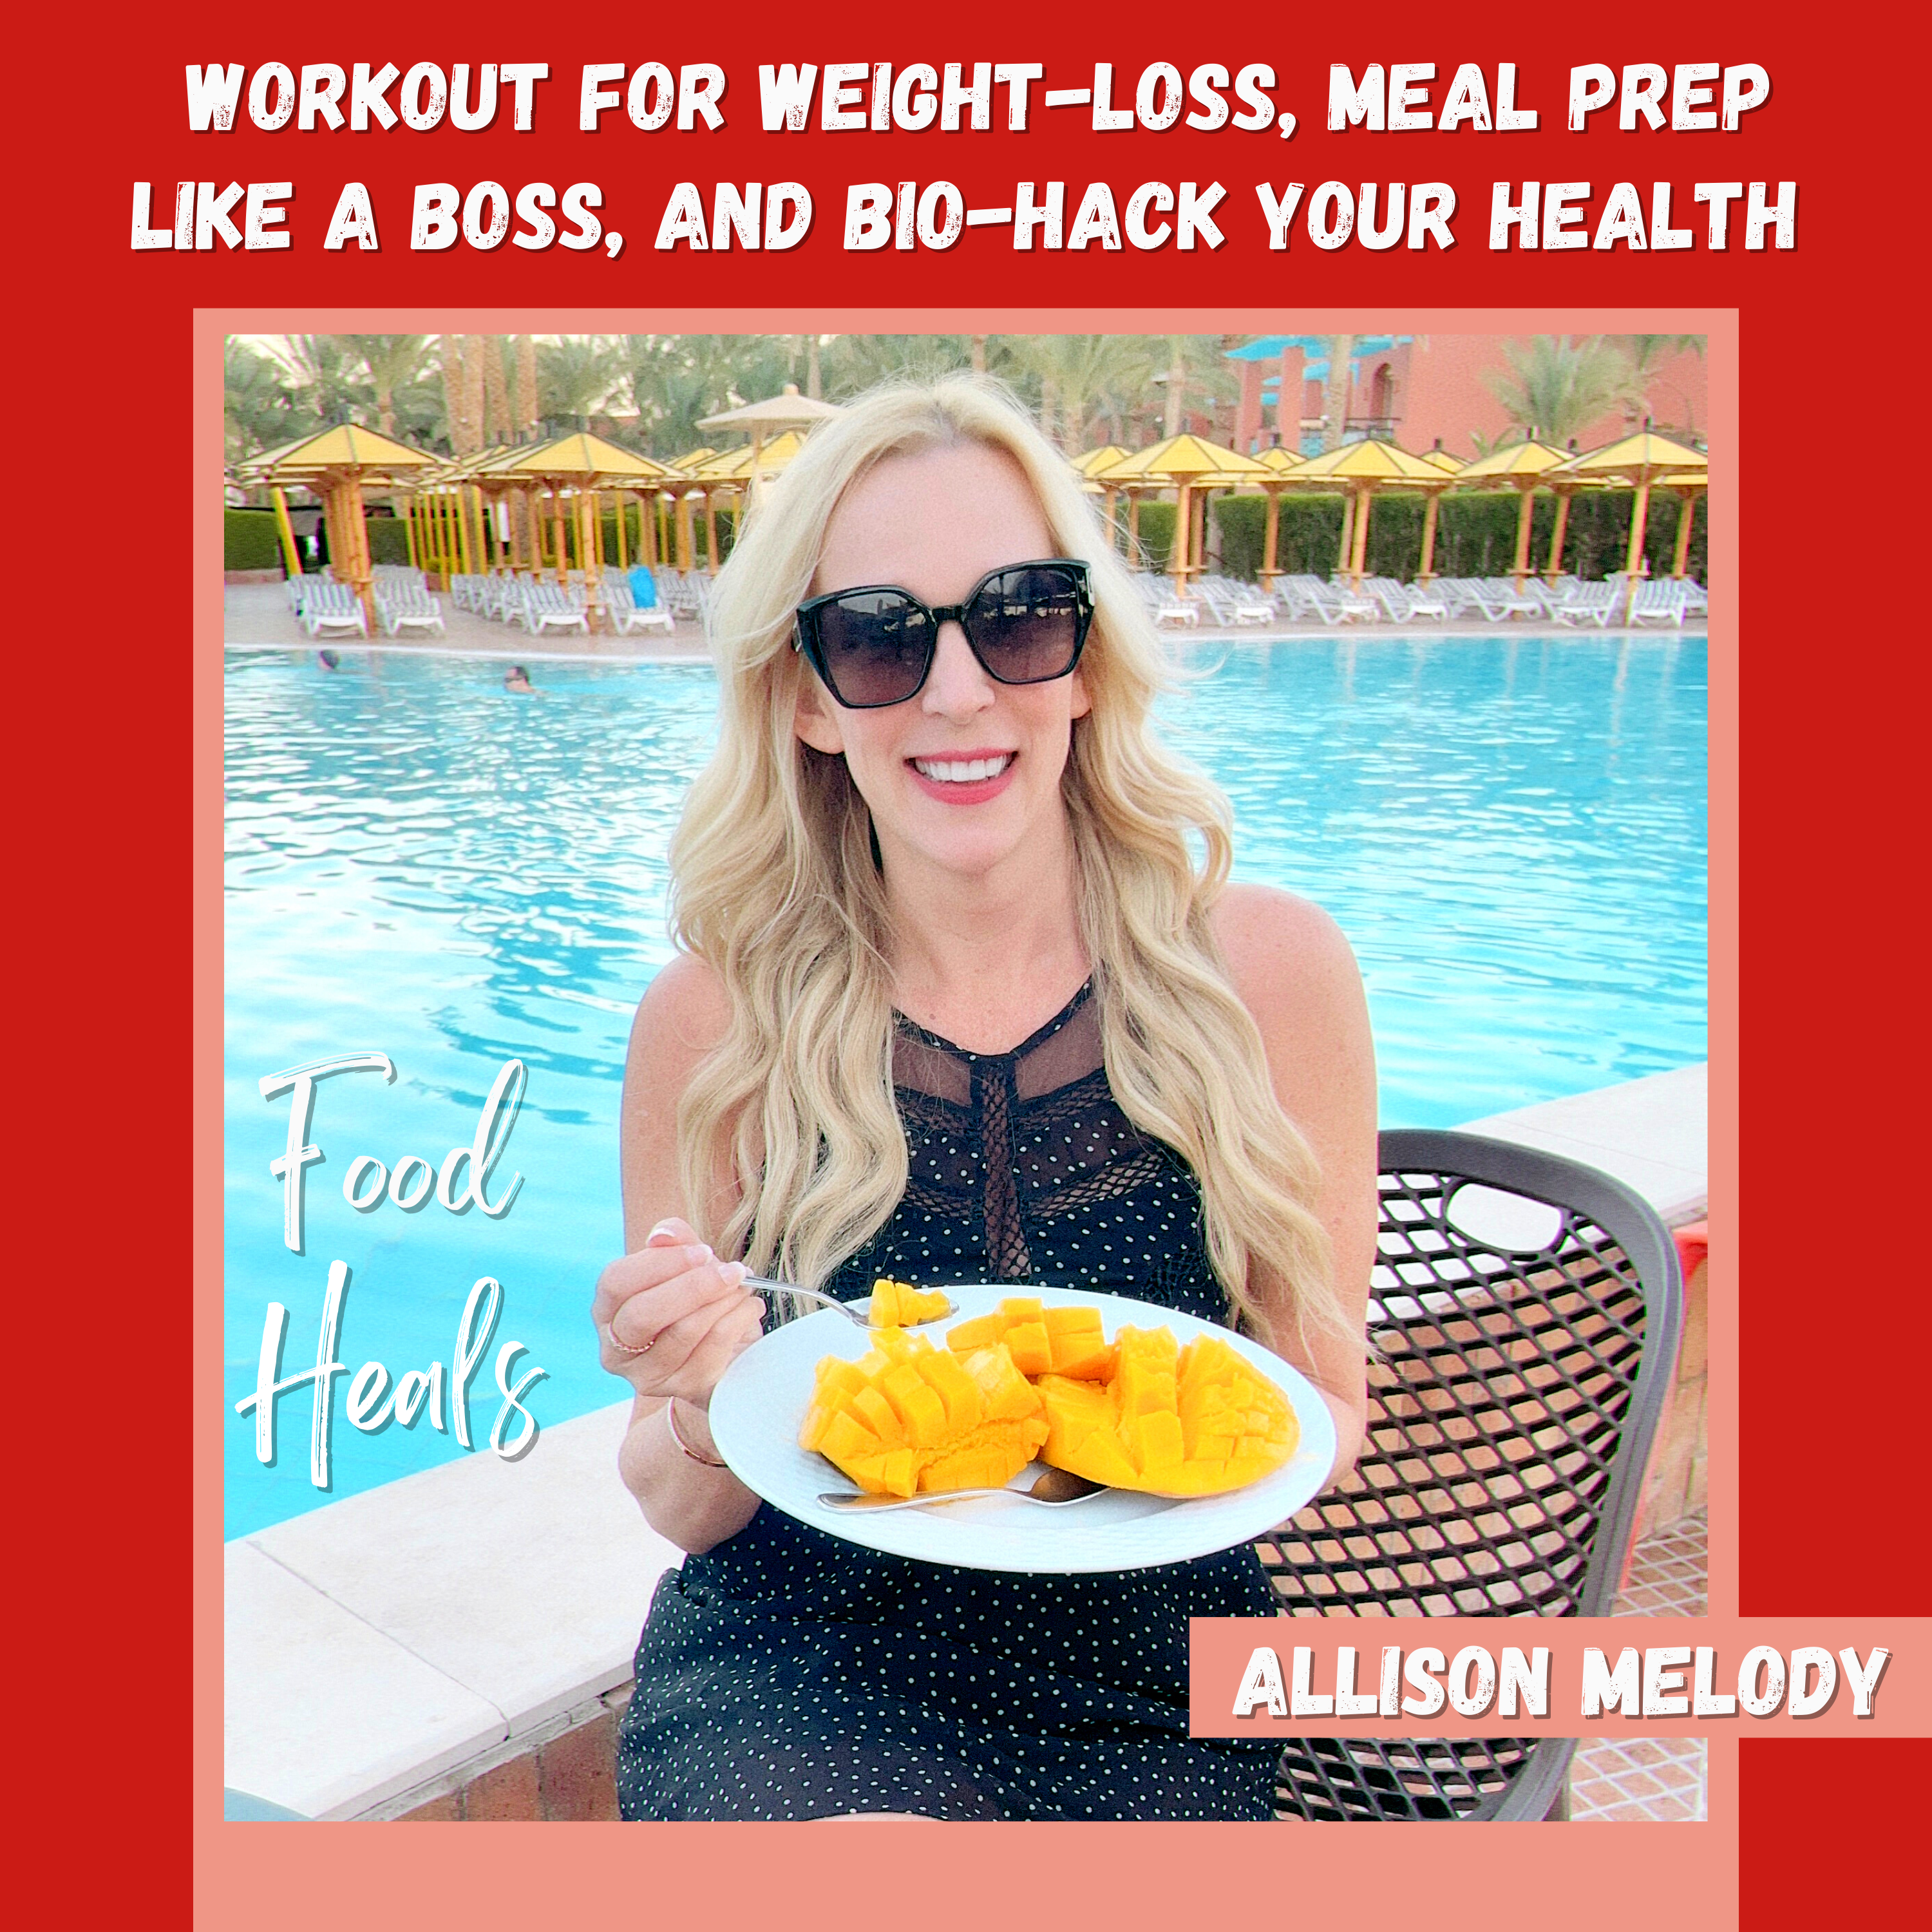 Workout for Weight-loss, Meal Prep Like a Boss, and Bio-Hack Your Health with these Simple Game-Changing Routines (Healthy AF Part 2 of The Food Heals Podcast with Allison Melody